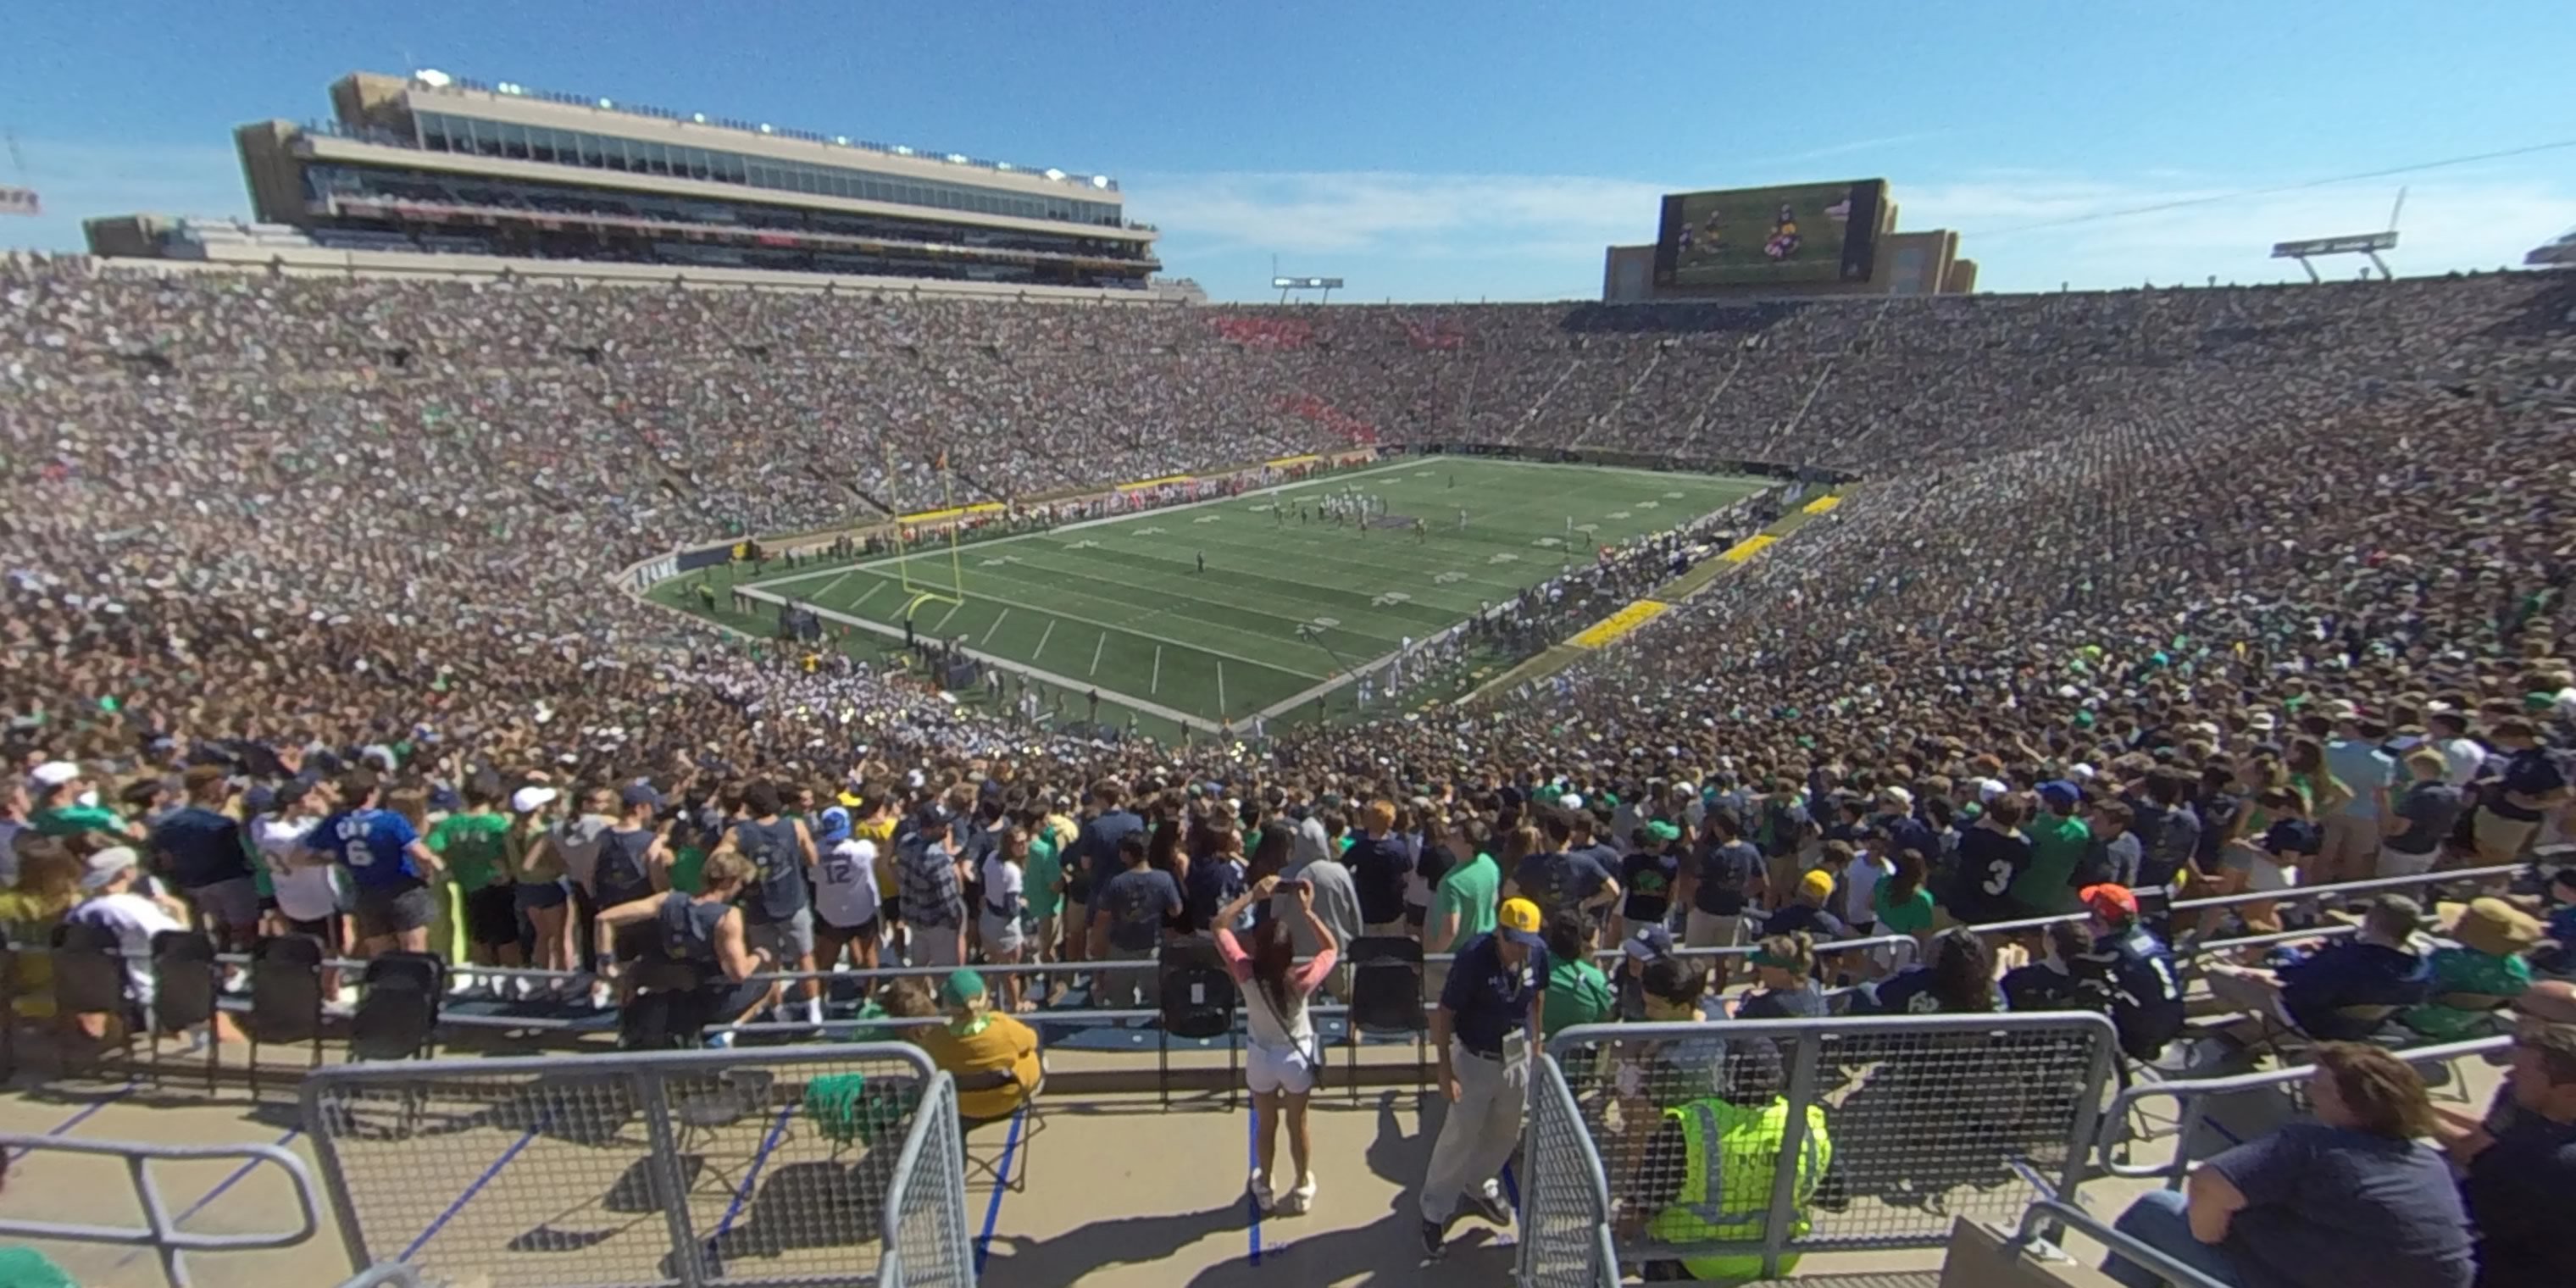 section 133 panoramic seat view  - notre dame stadium